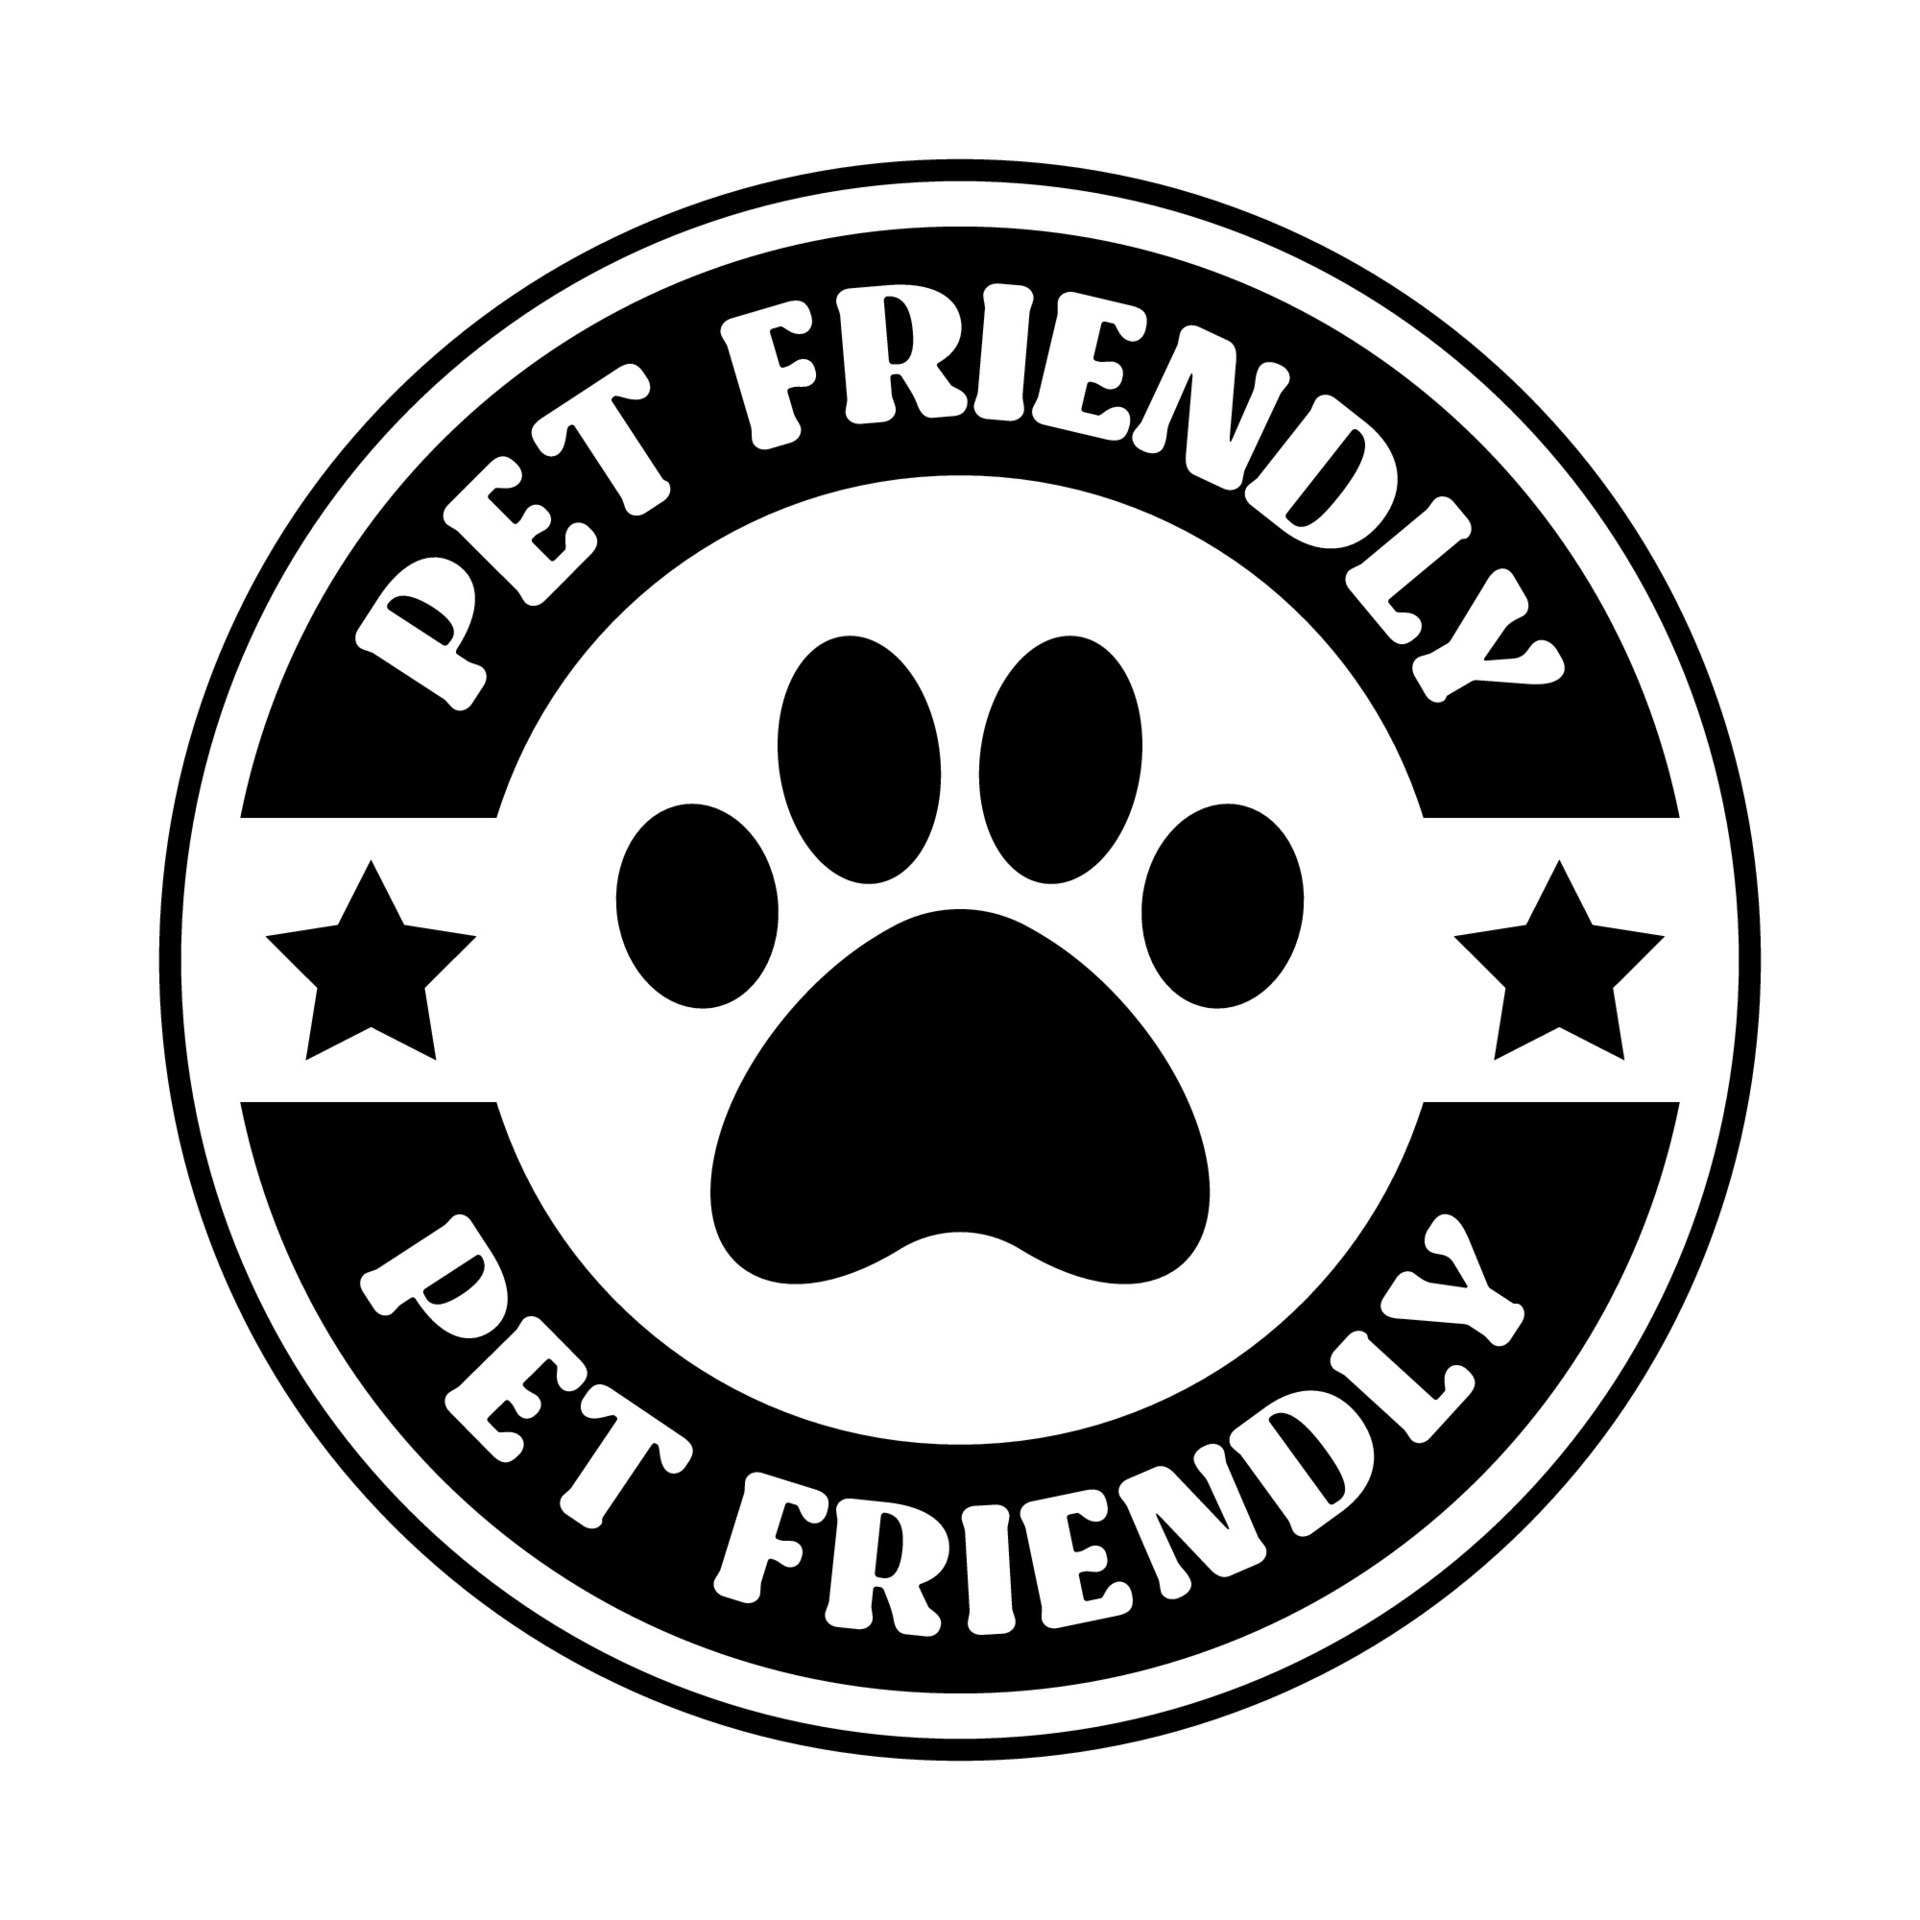 Pet friendly badge stamp. This space allows mascots. Dogs and cats are welcome. 29376925 Vector Art at Vecteezy